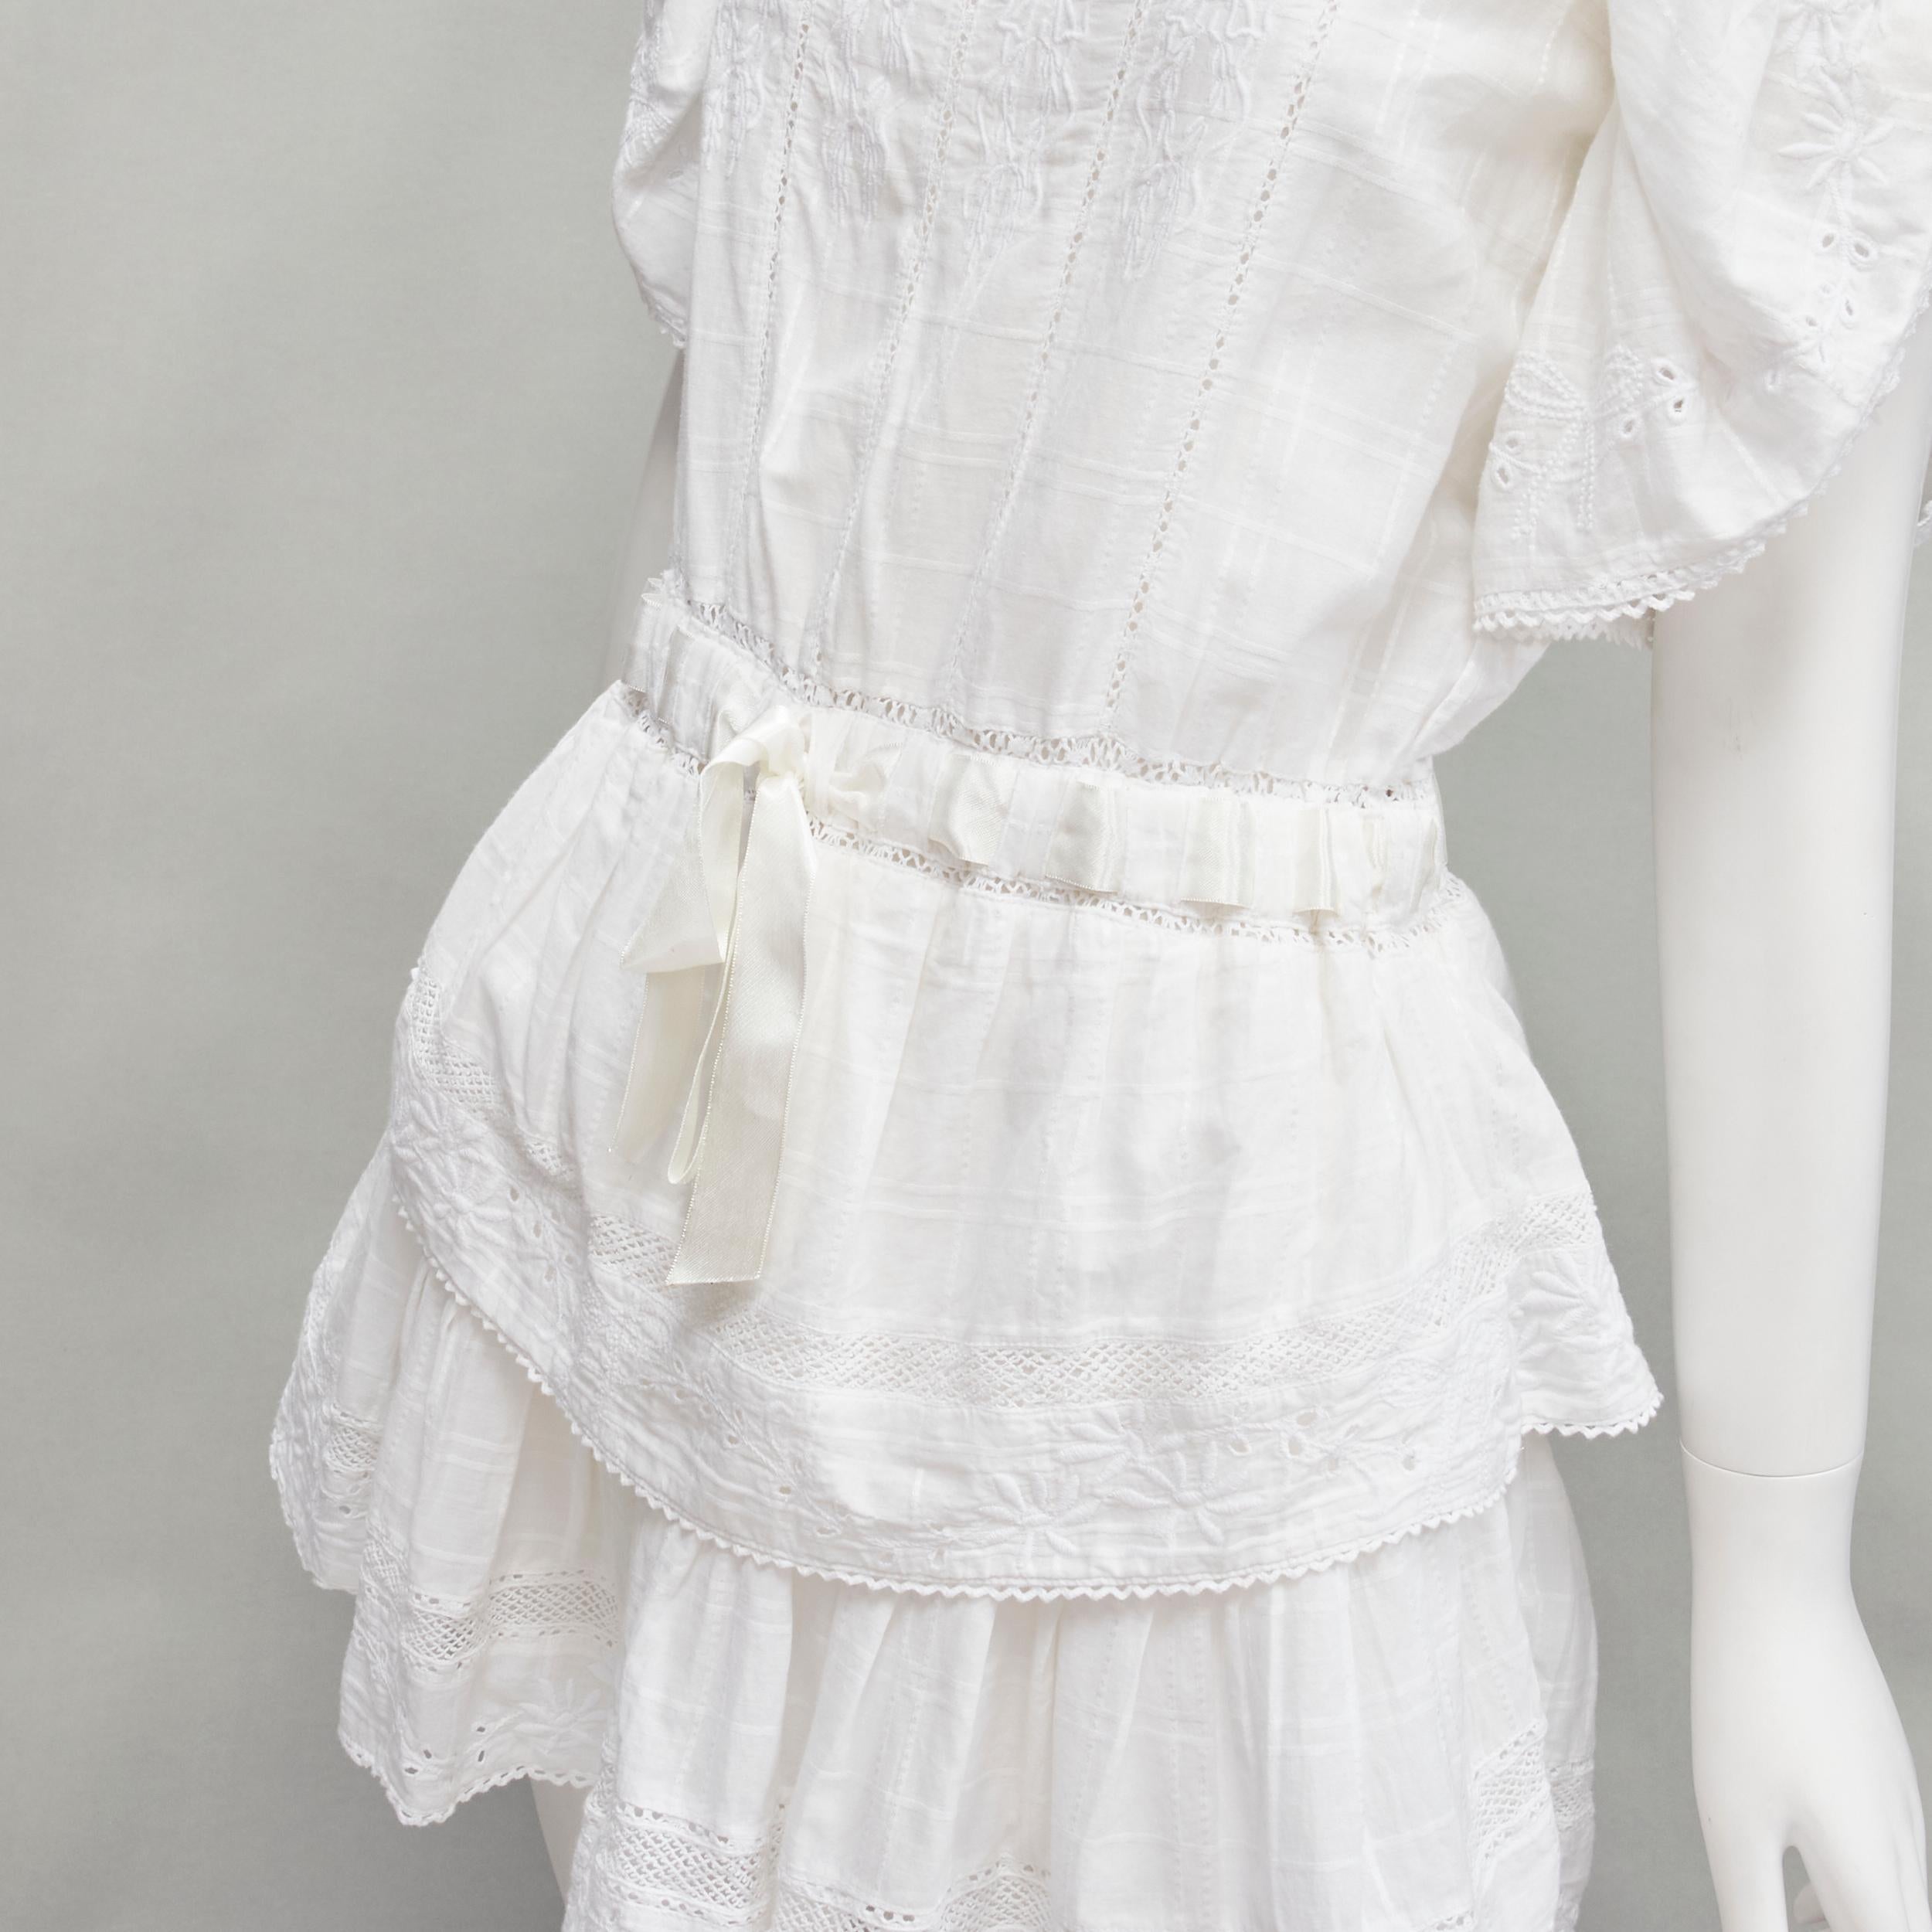 LOVE SHACK FANCY white cotton square neck lace trimmed ribbon cottage dress XS
Reference: AAWC/A00155
Brand: Love Shack Fancy
Material: Cotton
Color: White
Pattern: Solid
Closure: Belt
Extra Details: Tie ribbon belt closure.
Made in: